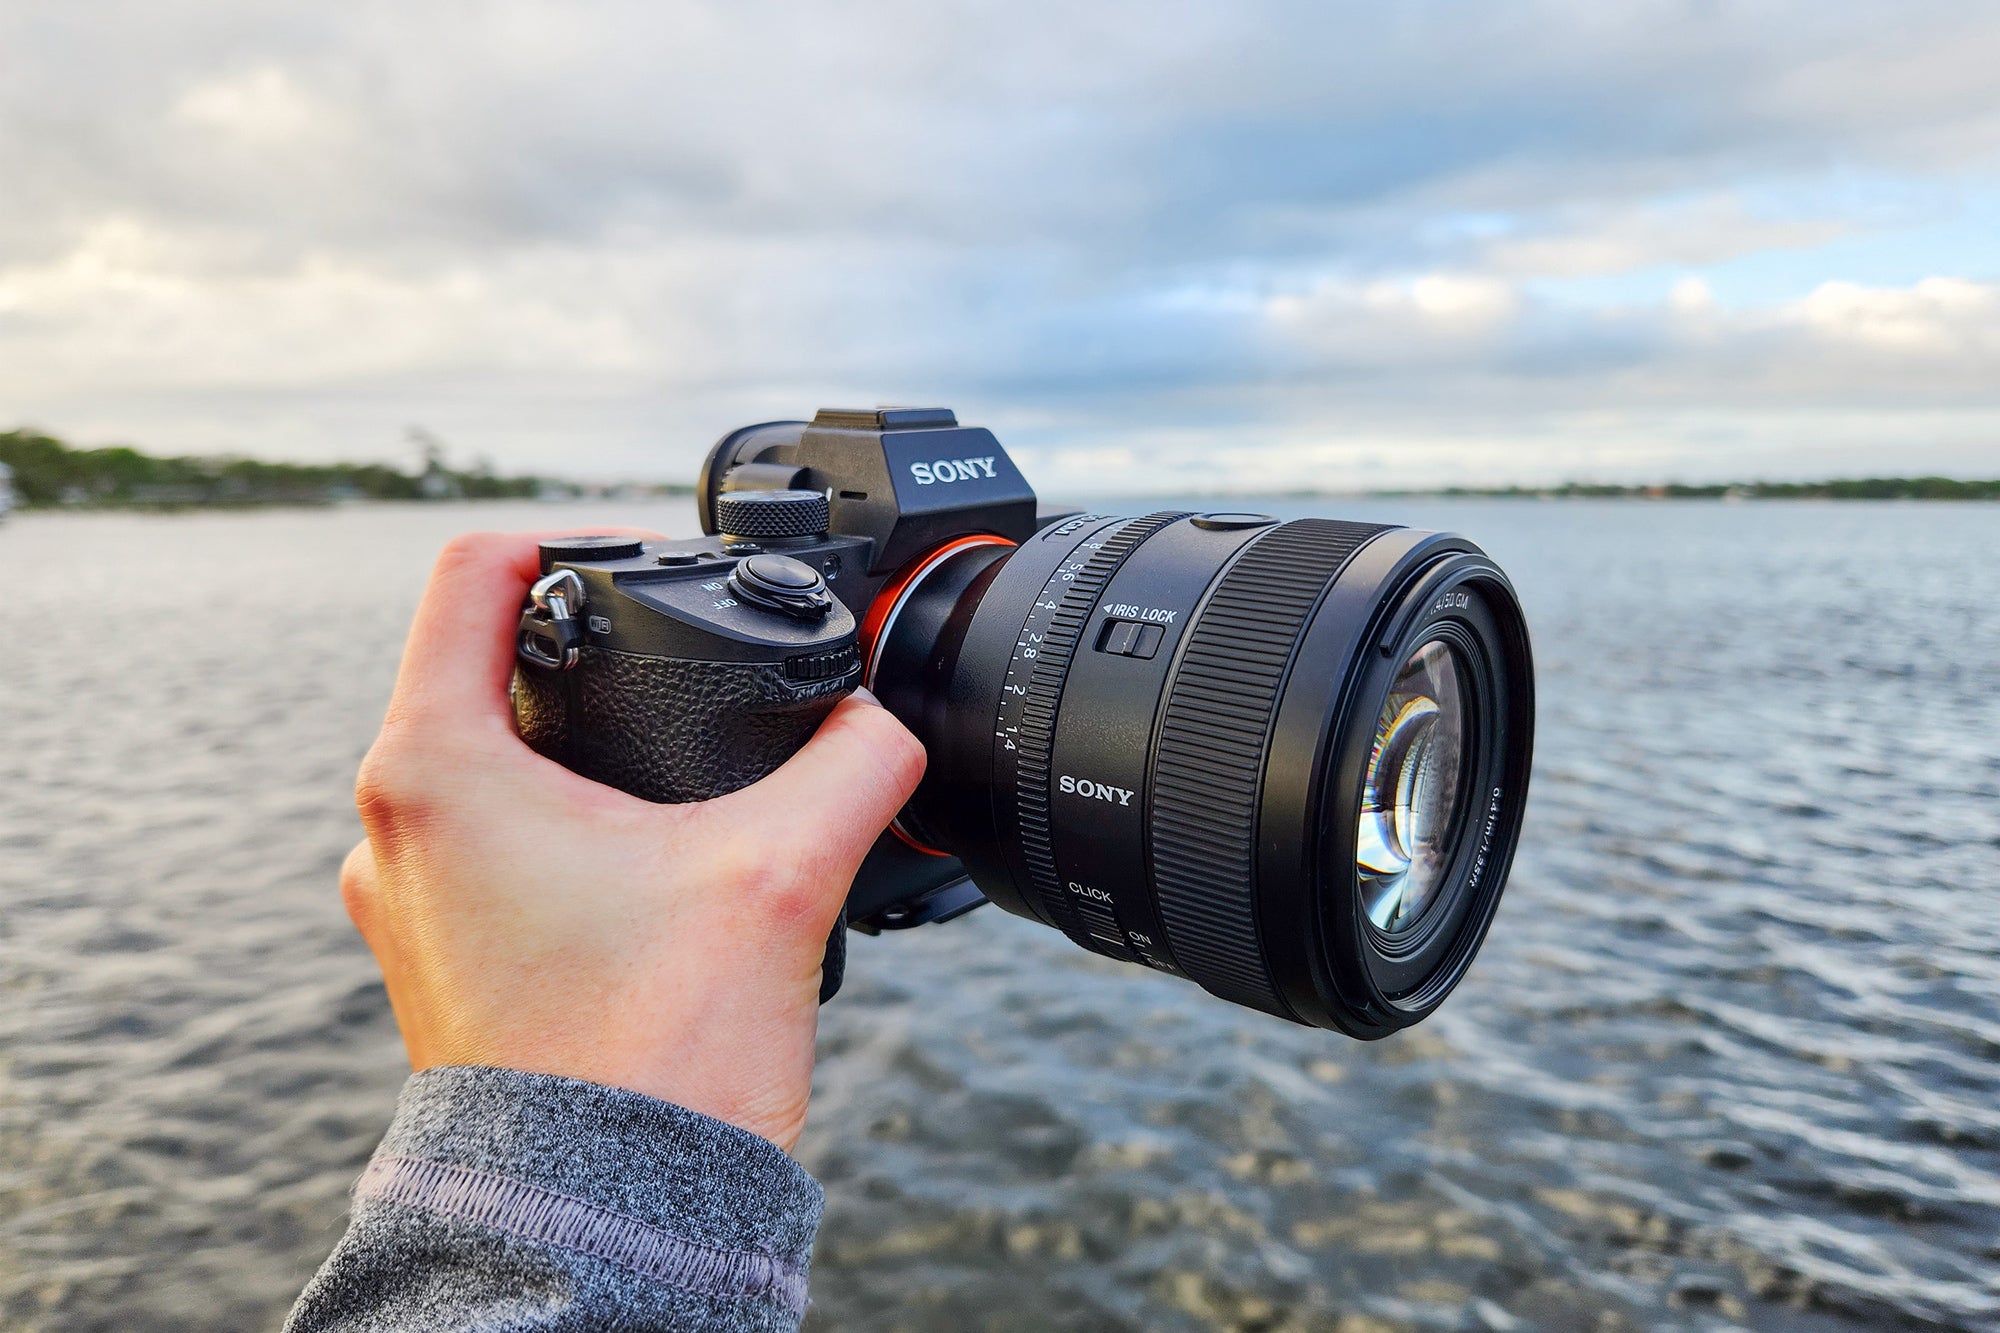 Sony FE 50mm f/1.4 GM review: A well-rounded yet impressive prime lens